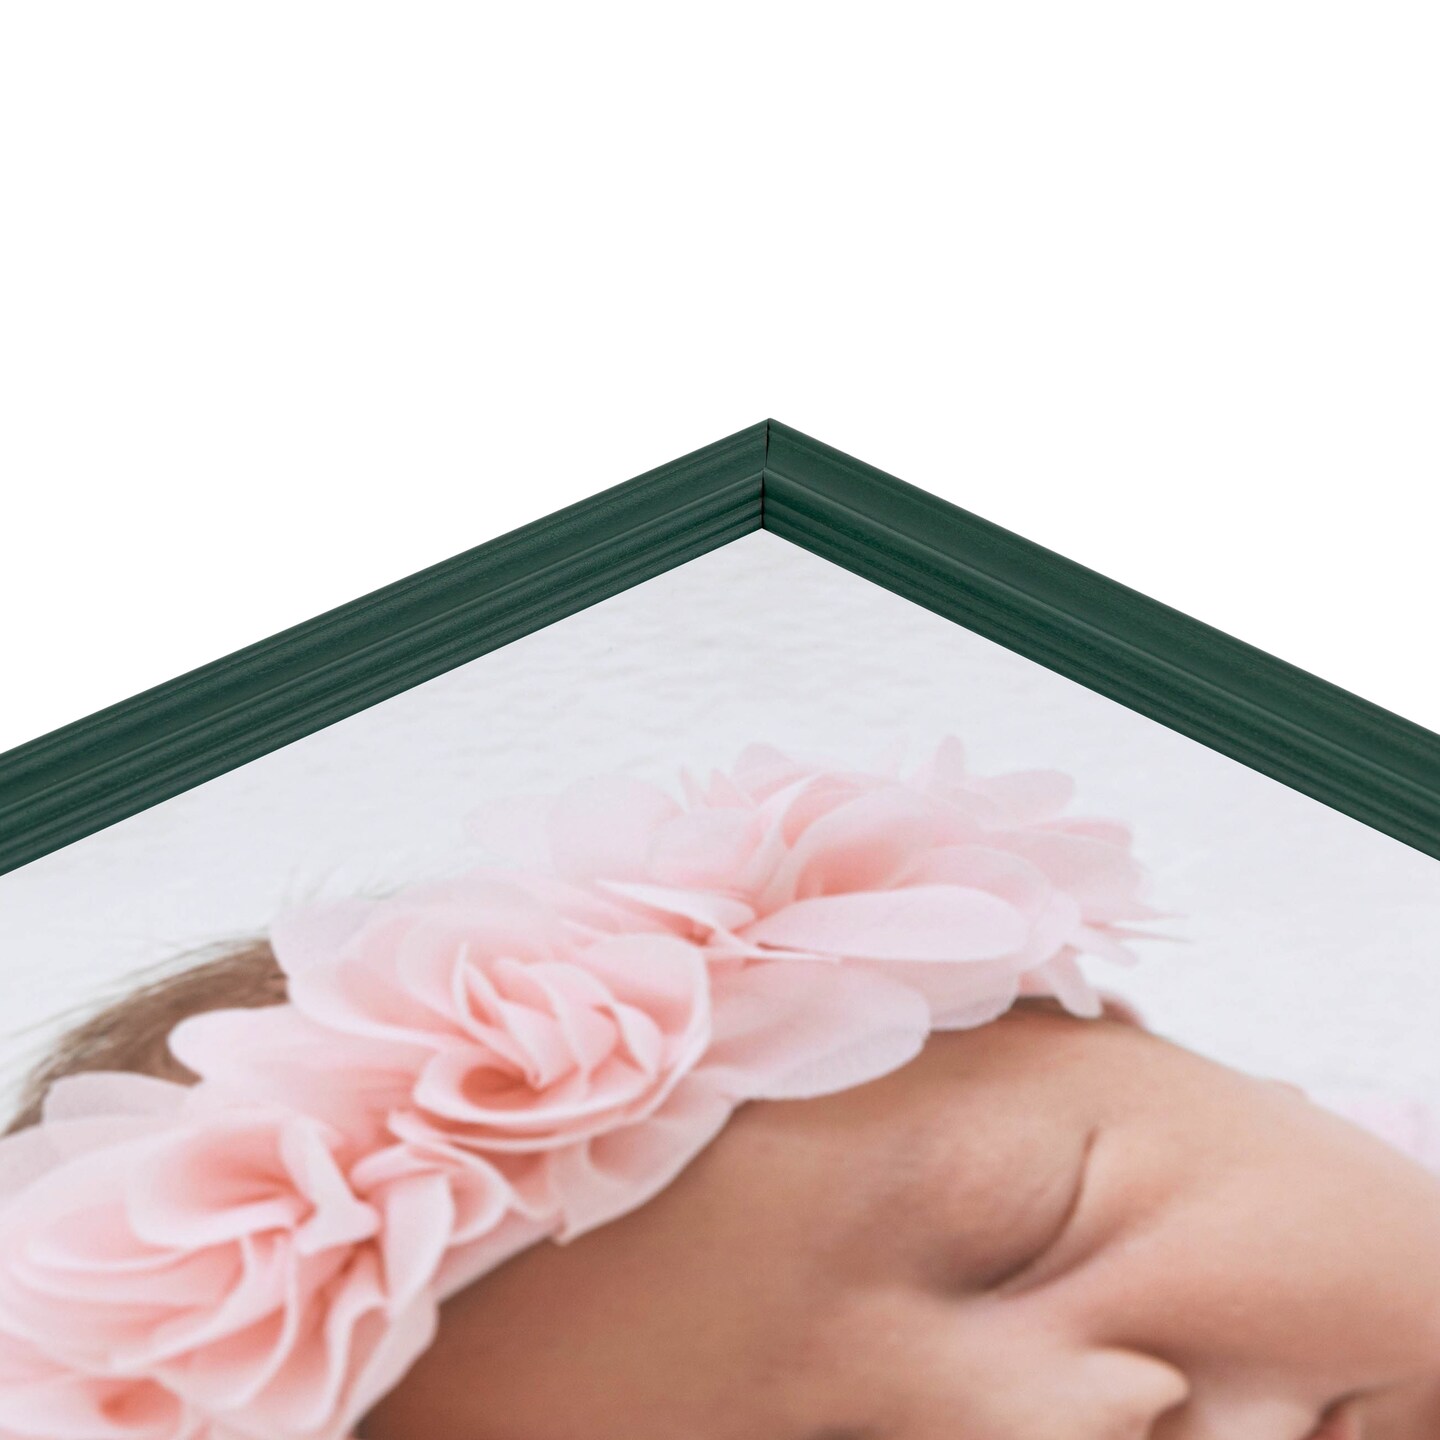 ArtToFrames 20x20 Inch  Picture Frame, This 1 Inch Custom Wood Poster Frame is Available in Multiple Colors, Great for Your Art or Photos - Comes with 060 Plexi Glass and  Corrugated Backing (A9OS)